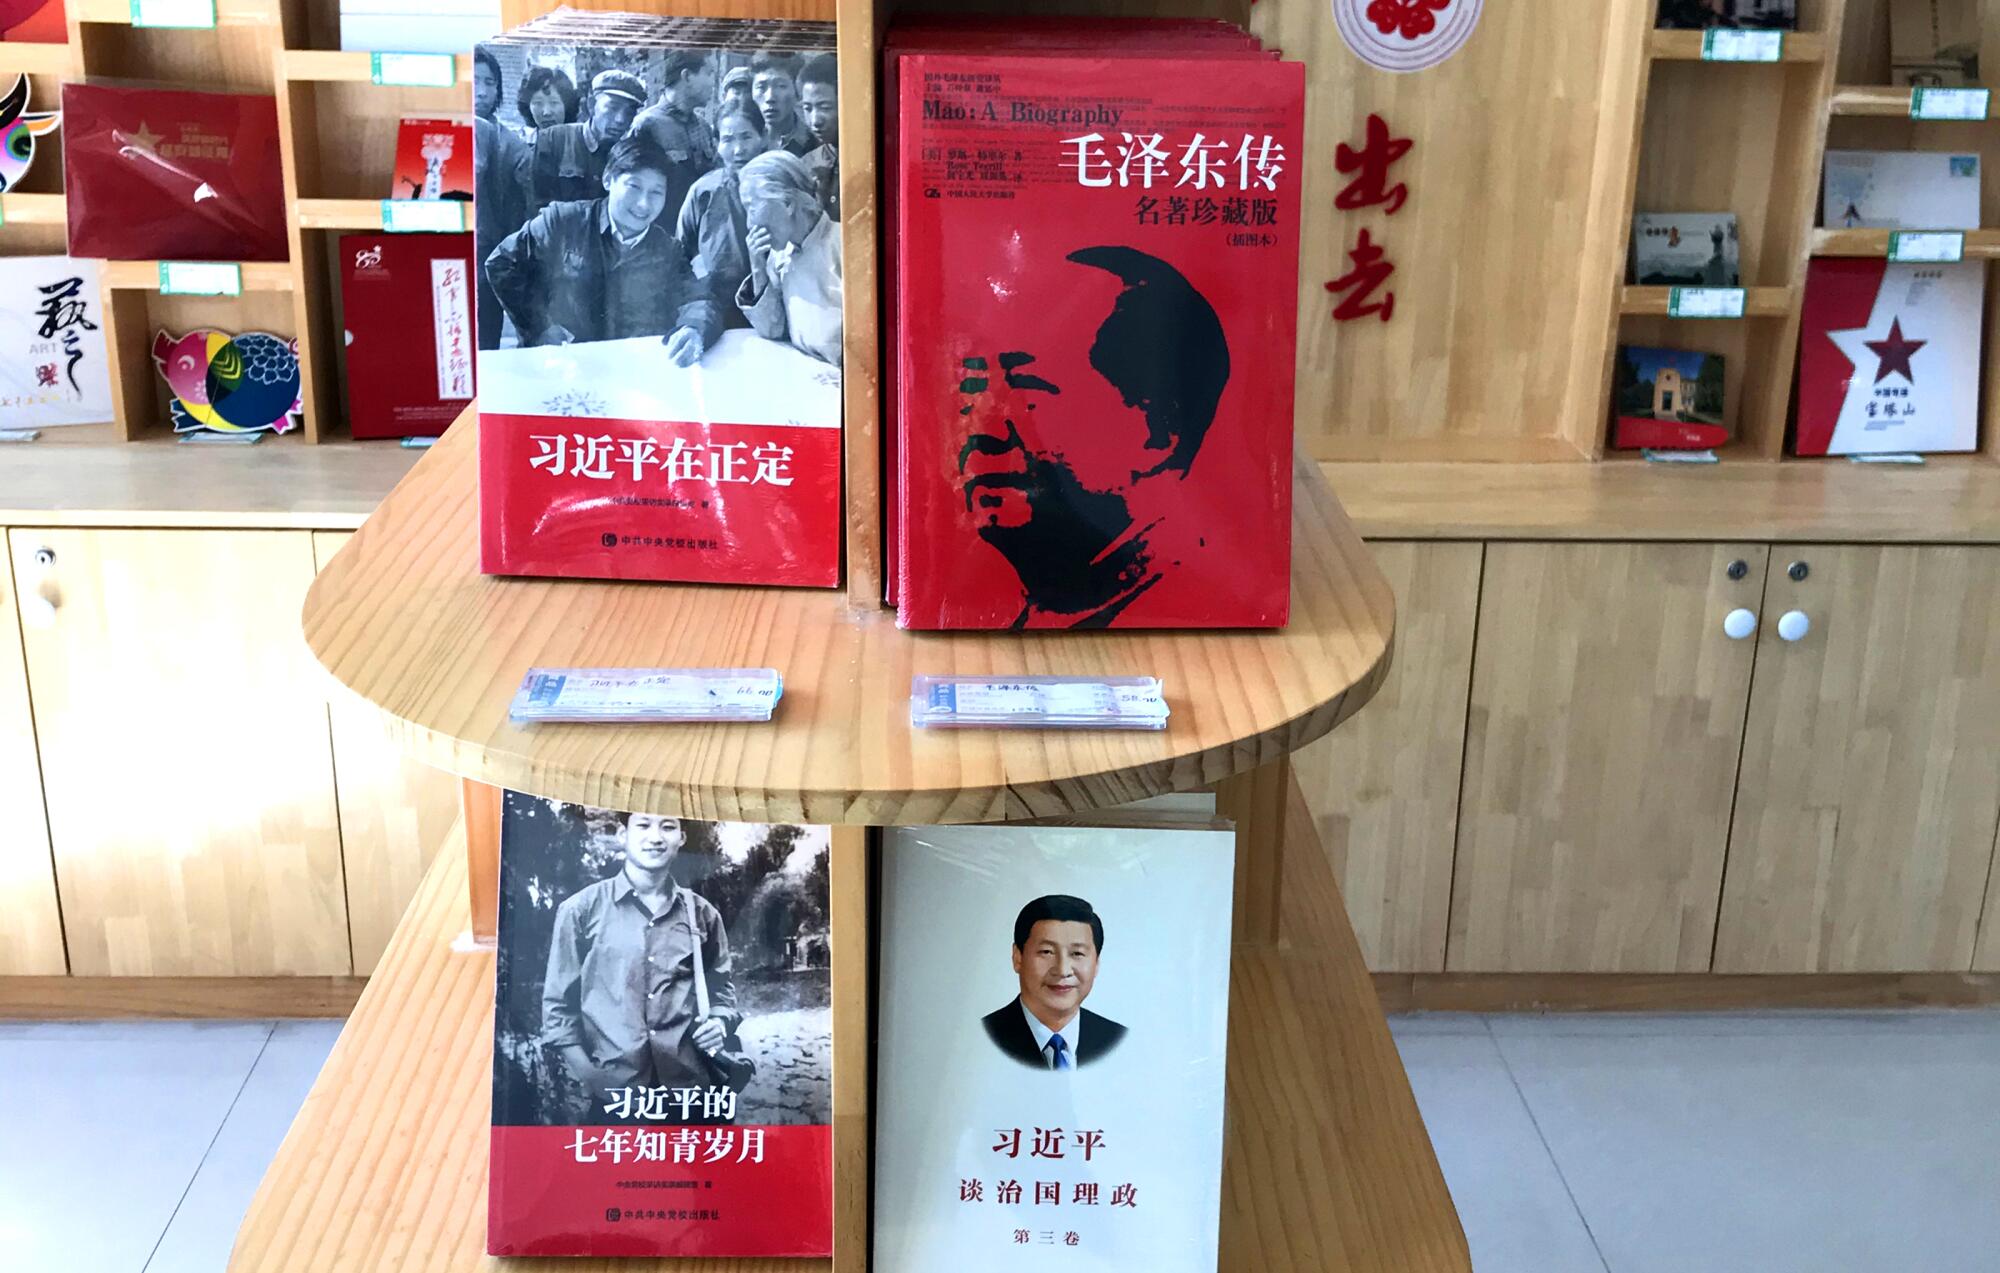 Books about Xi Jinping and Mao Zedong at a gift shop.